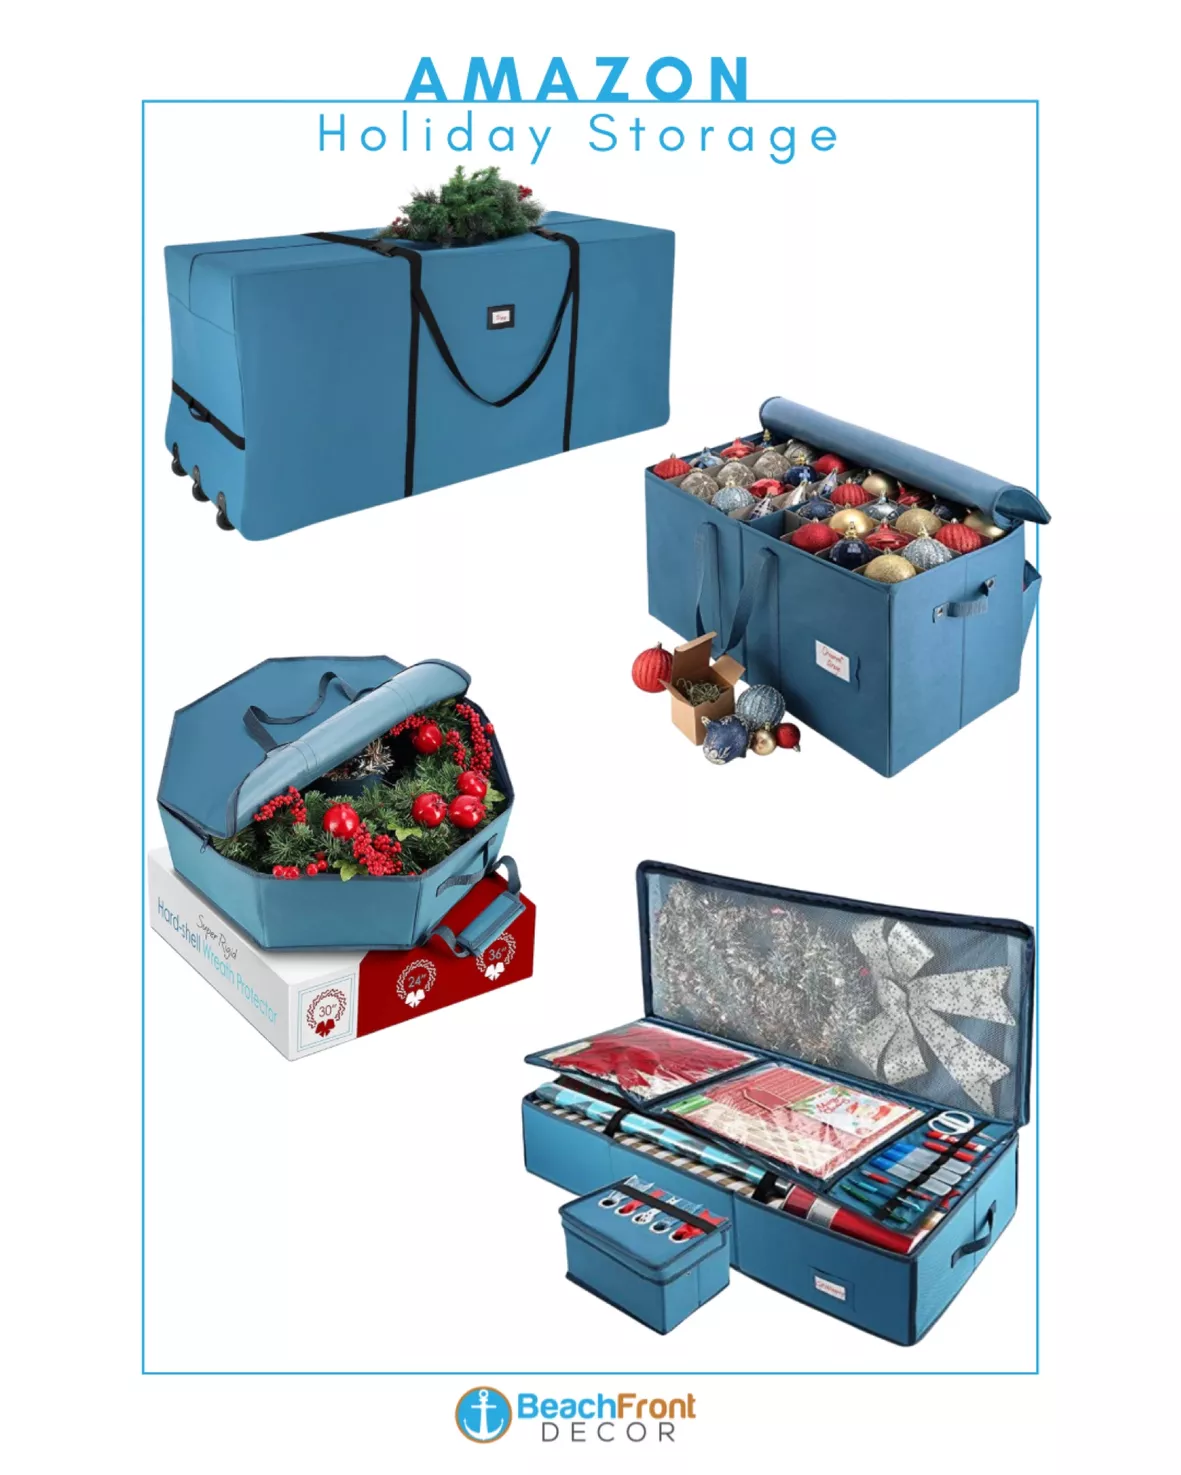 HEARTH & HARBOR Blue Large Christmas Wrapping Paper Storage Box